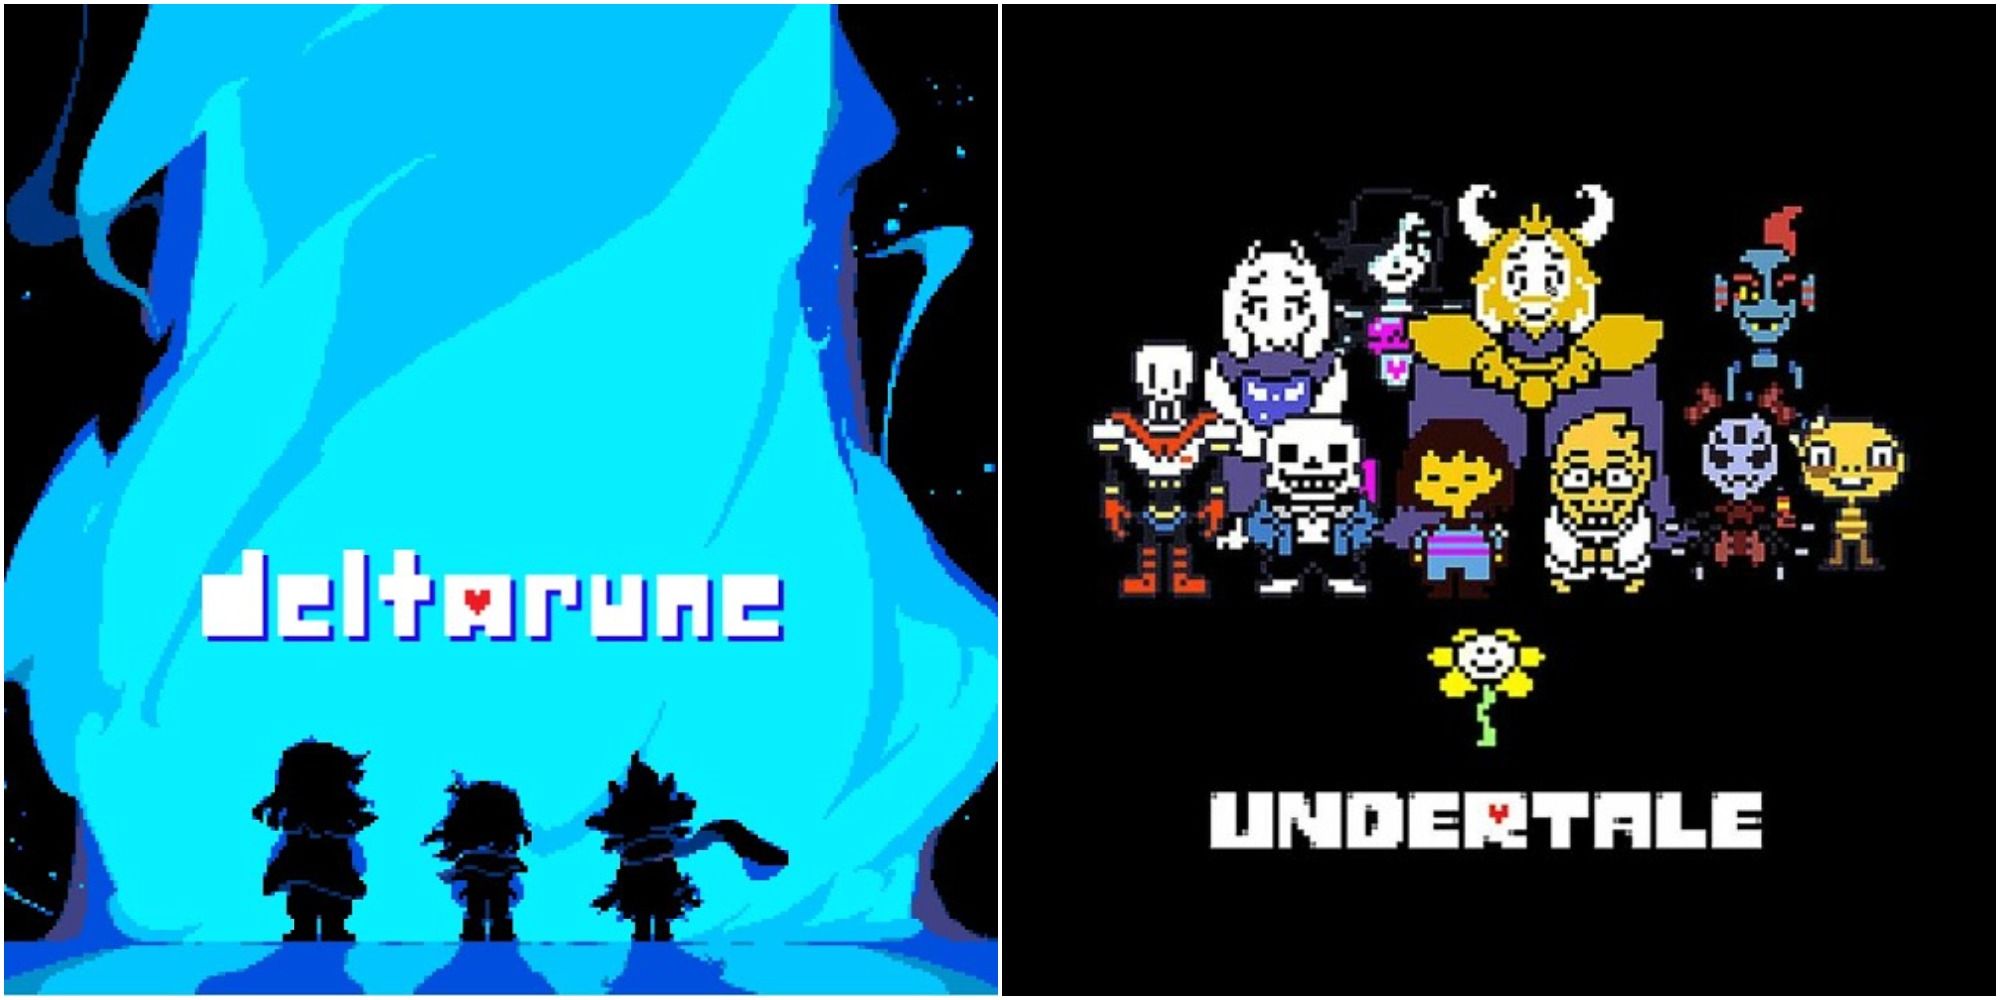 Toby Fox's indie game Deltarune protagonists compared to Undertale protagonists